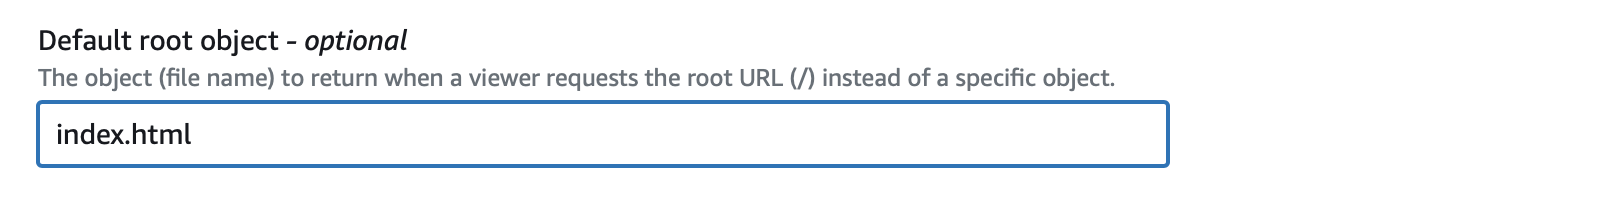 AWS CloudFront Default root object